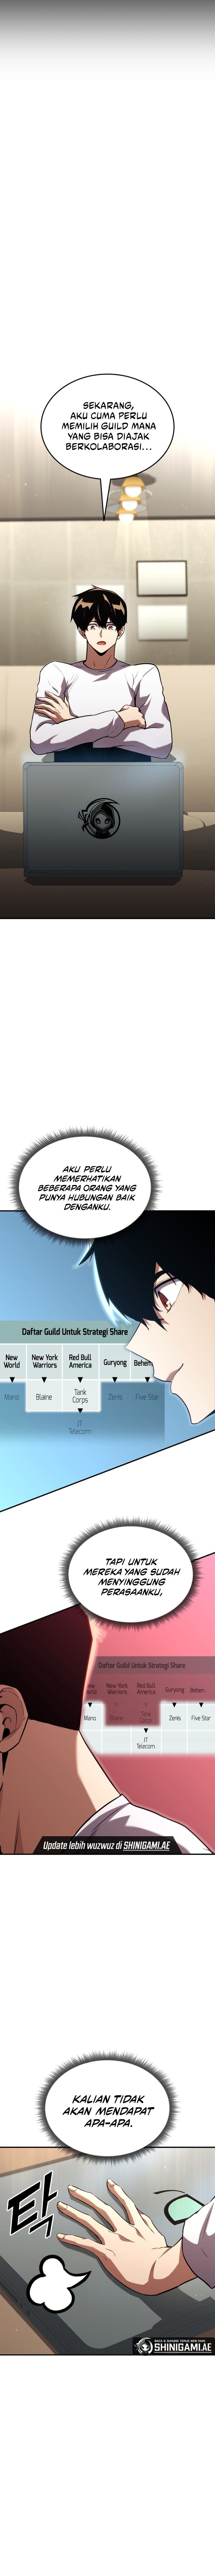 rankers-return Chapter 140